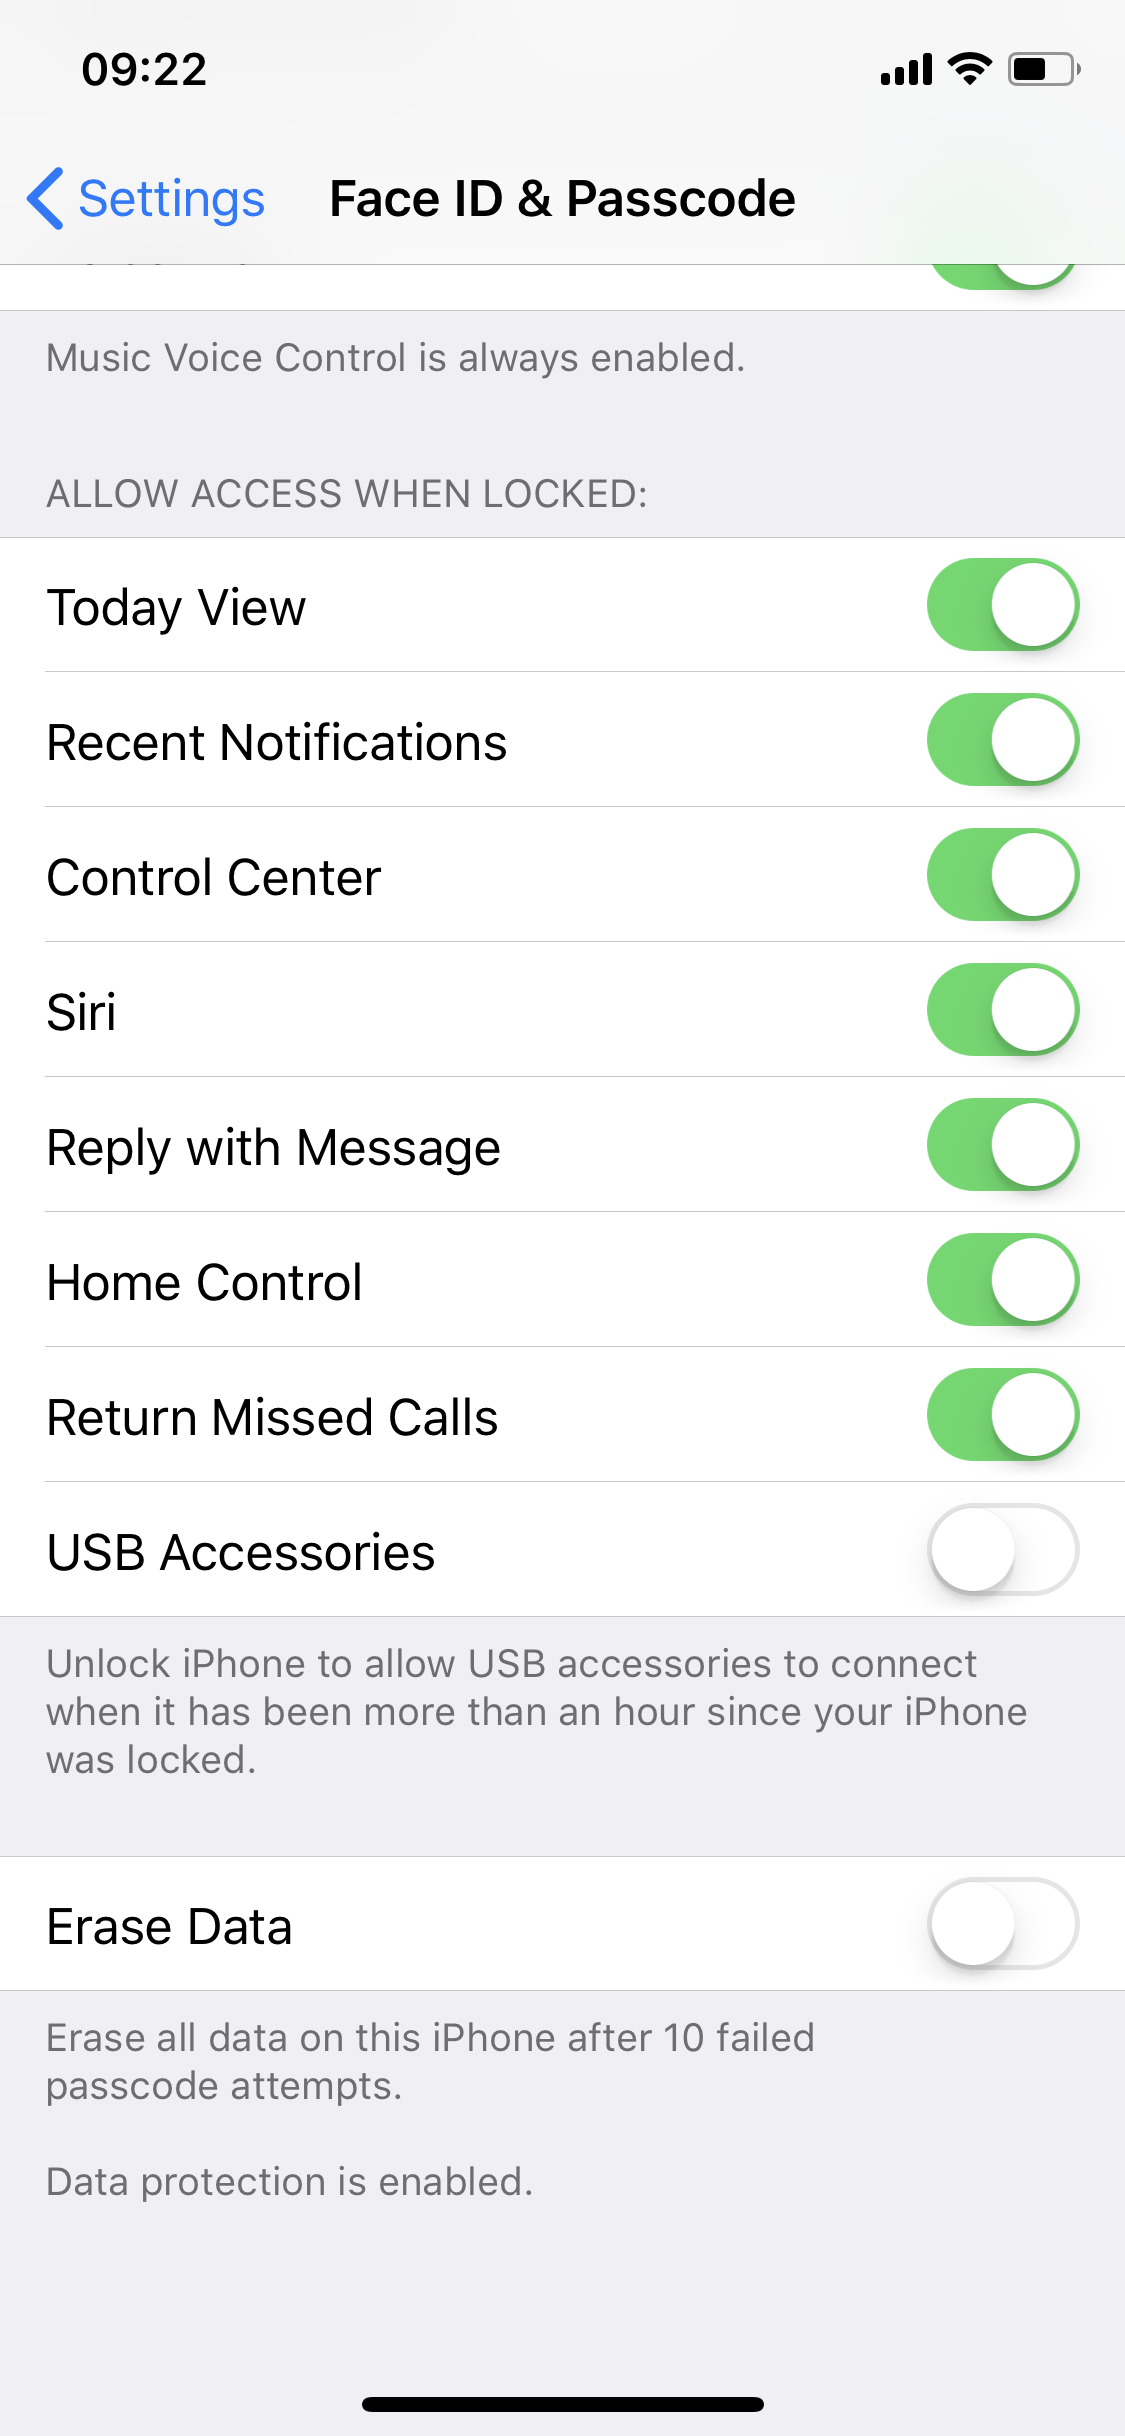 How to Use Apple's Latest 'USB Restricted Mode' in iOS 11.4.1?